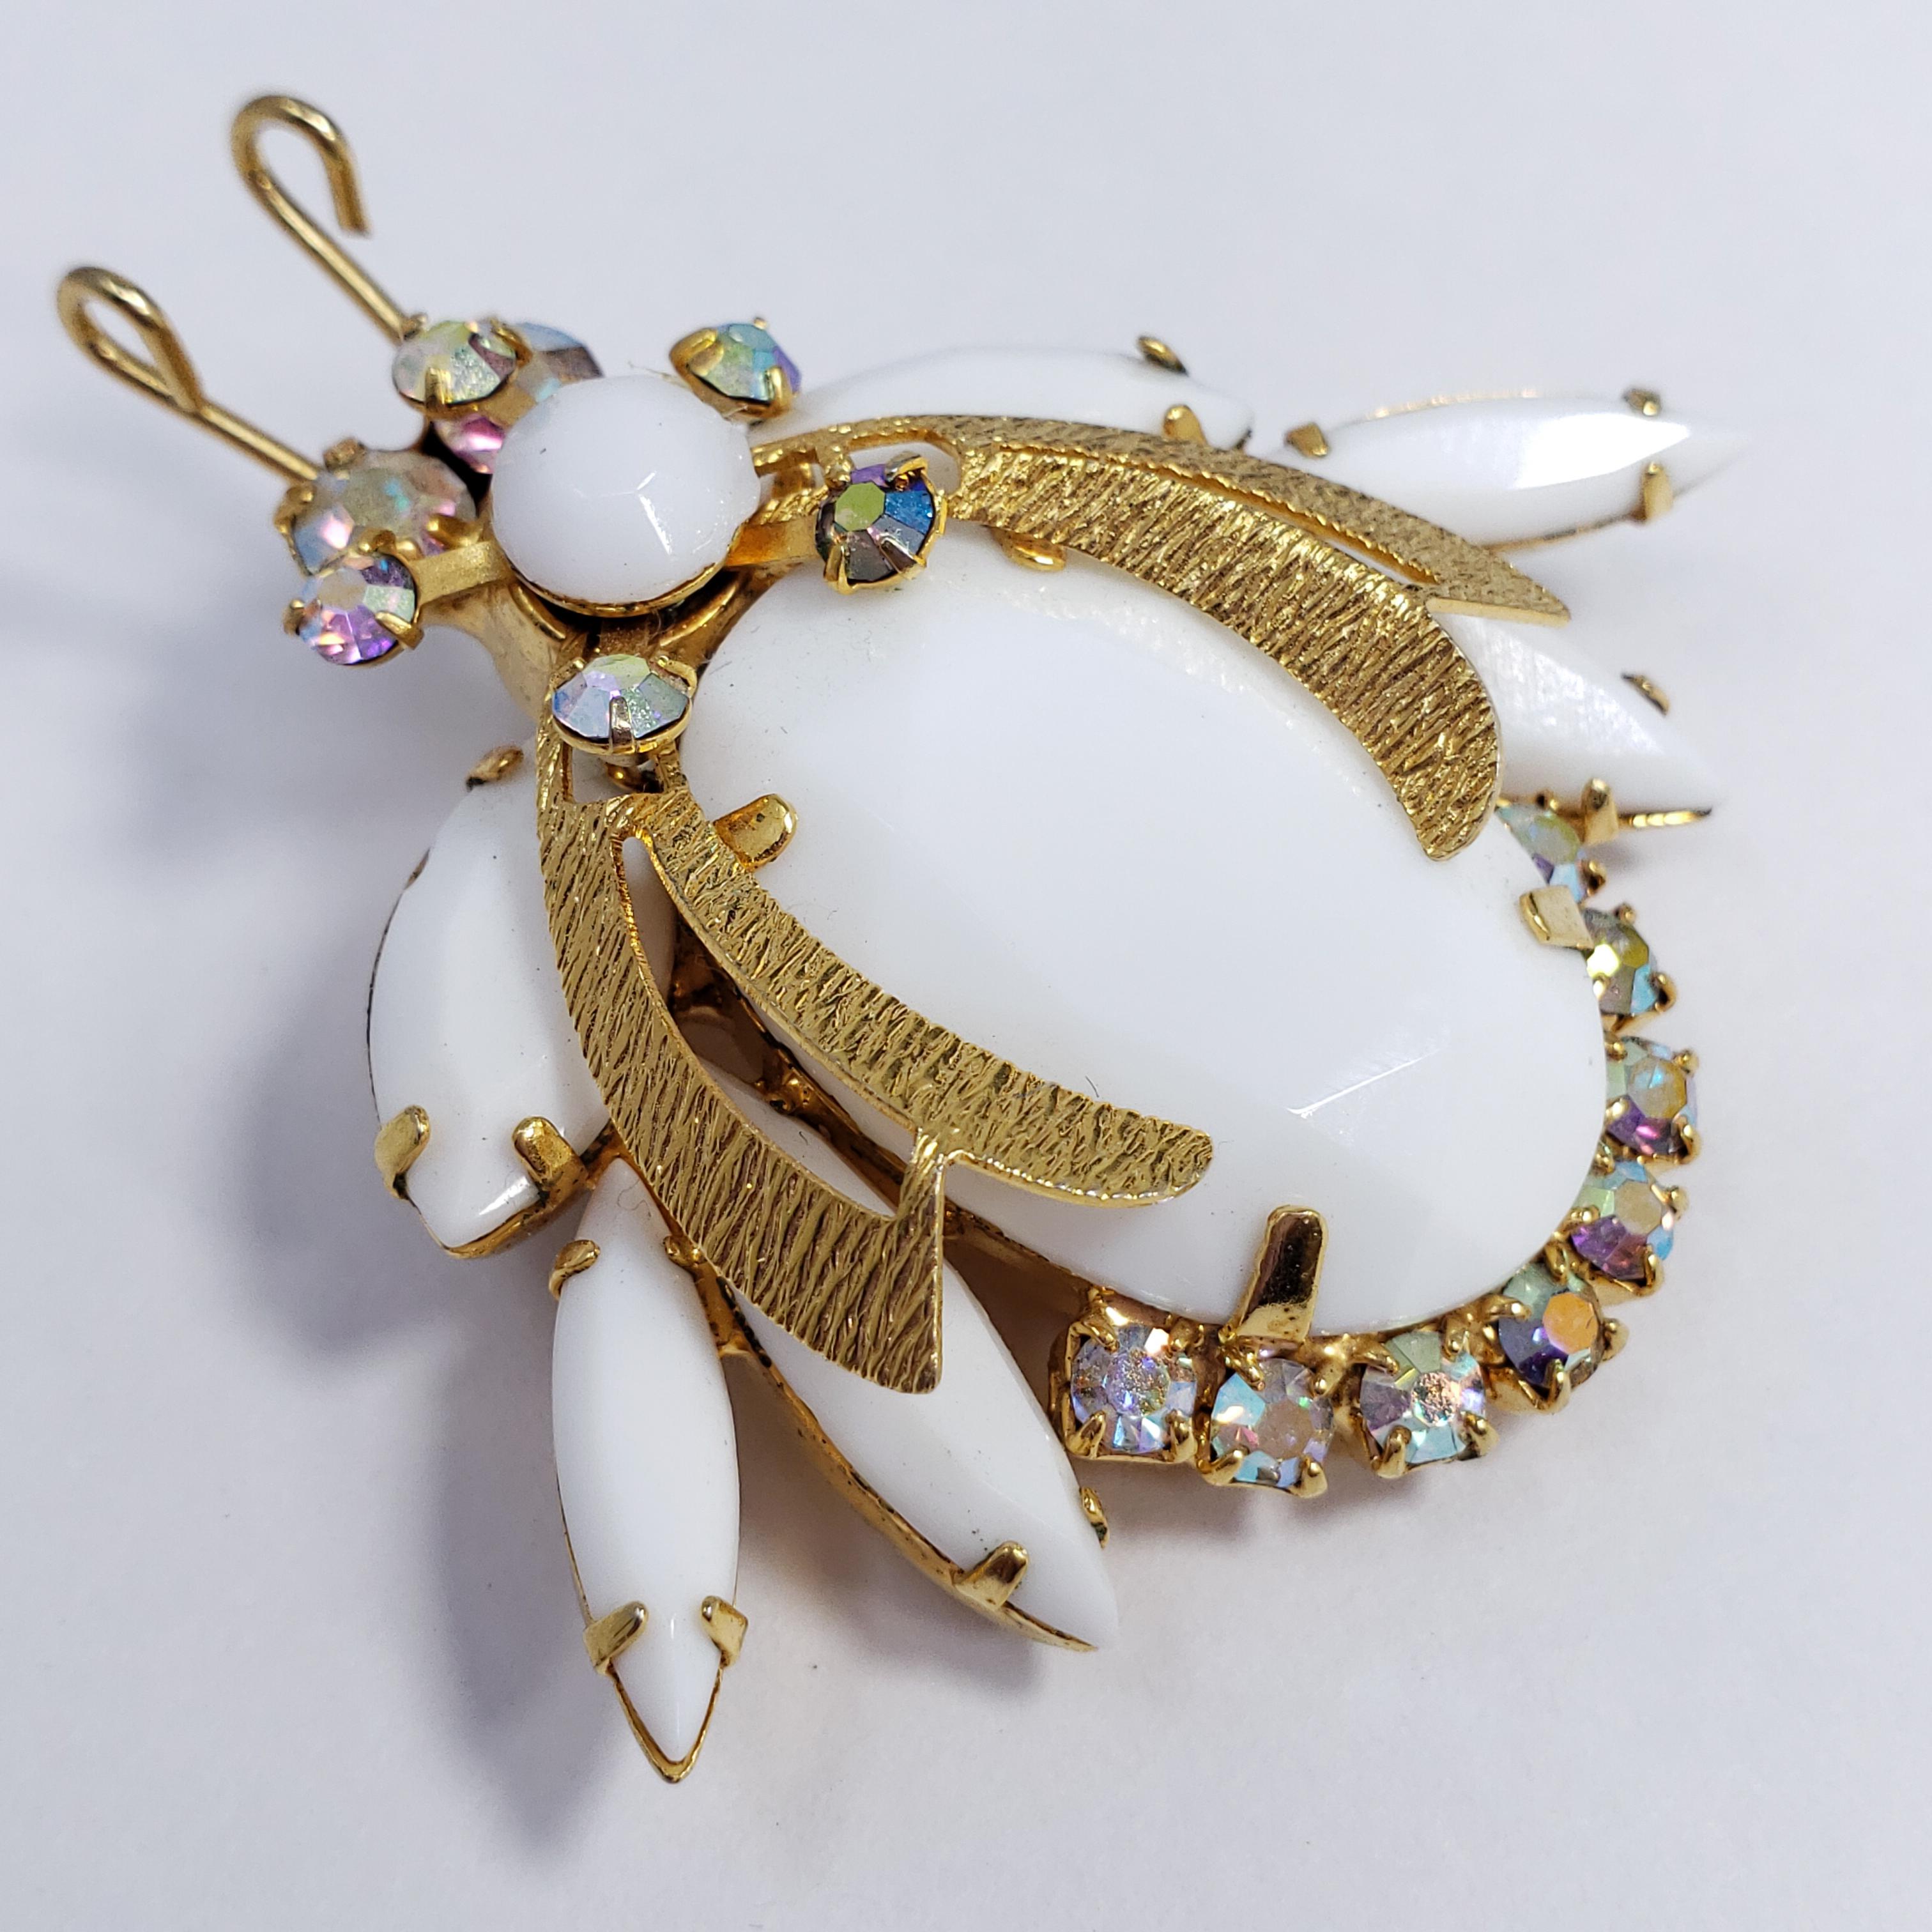 A dazzling pin from the DeLizza and Elster Juliana collection! An opaque white glass crystal beetle is accented with glittering aurora borealis crystals, set in gold tone. 

